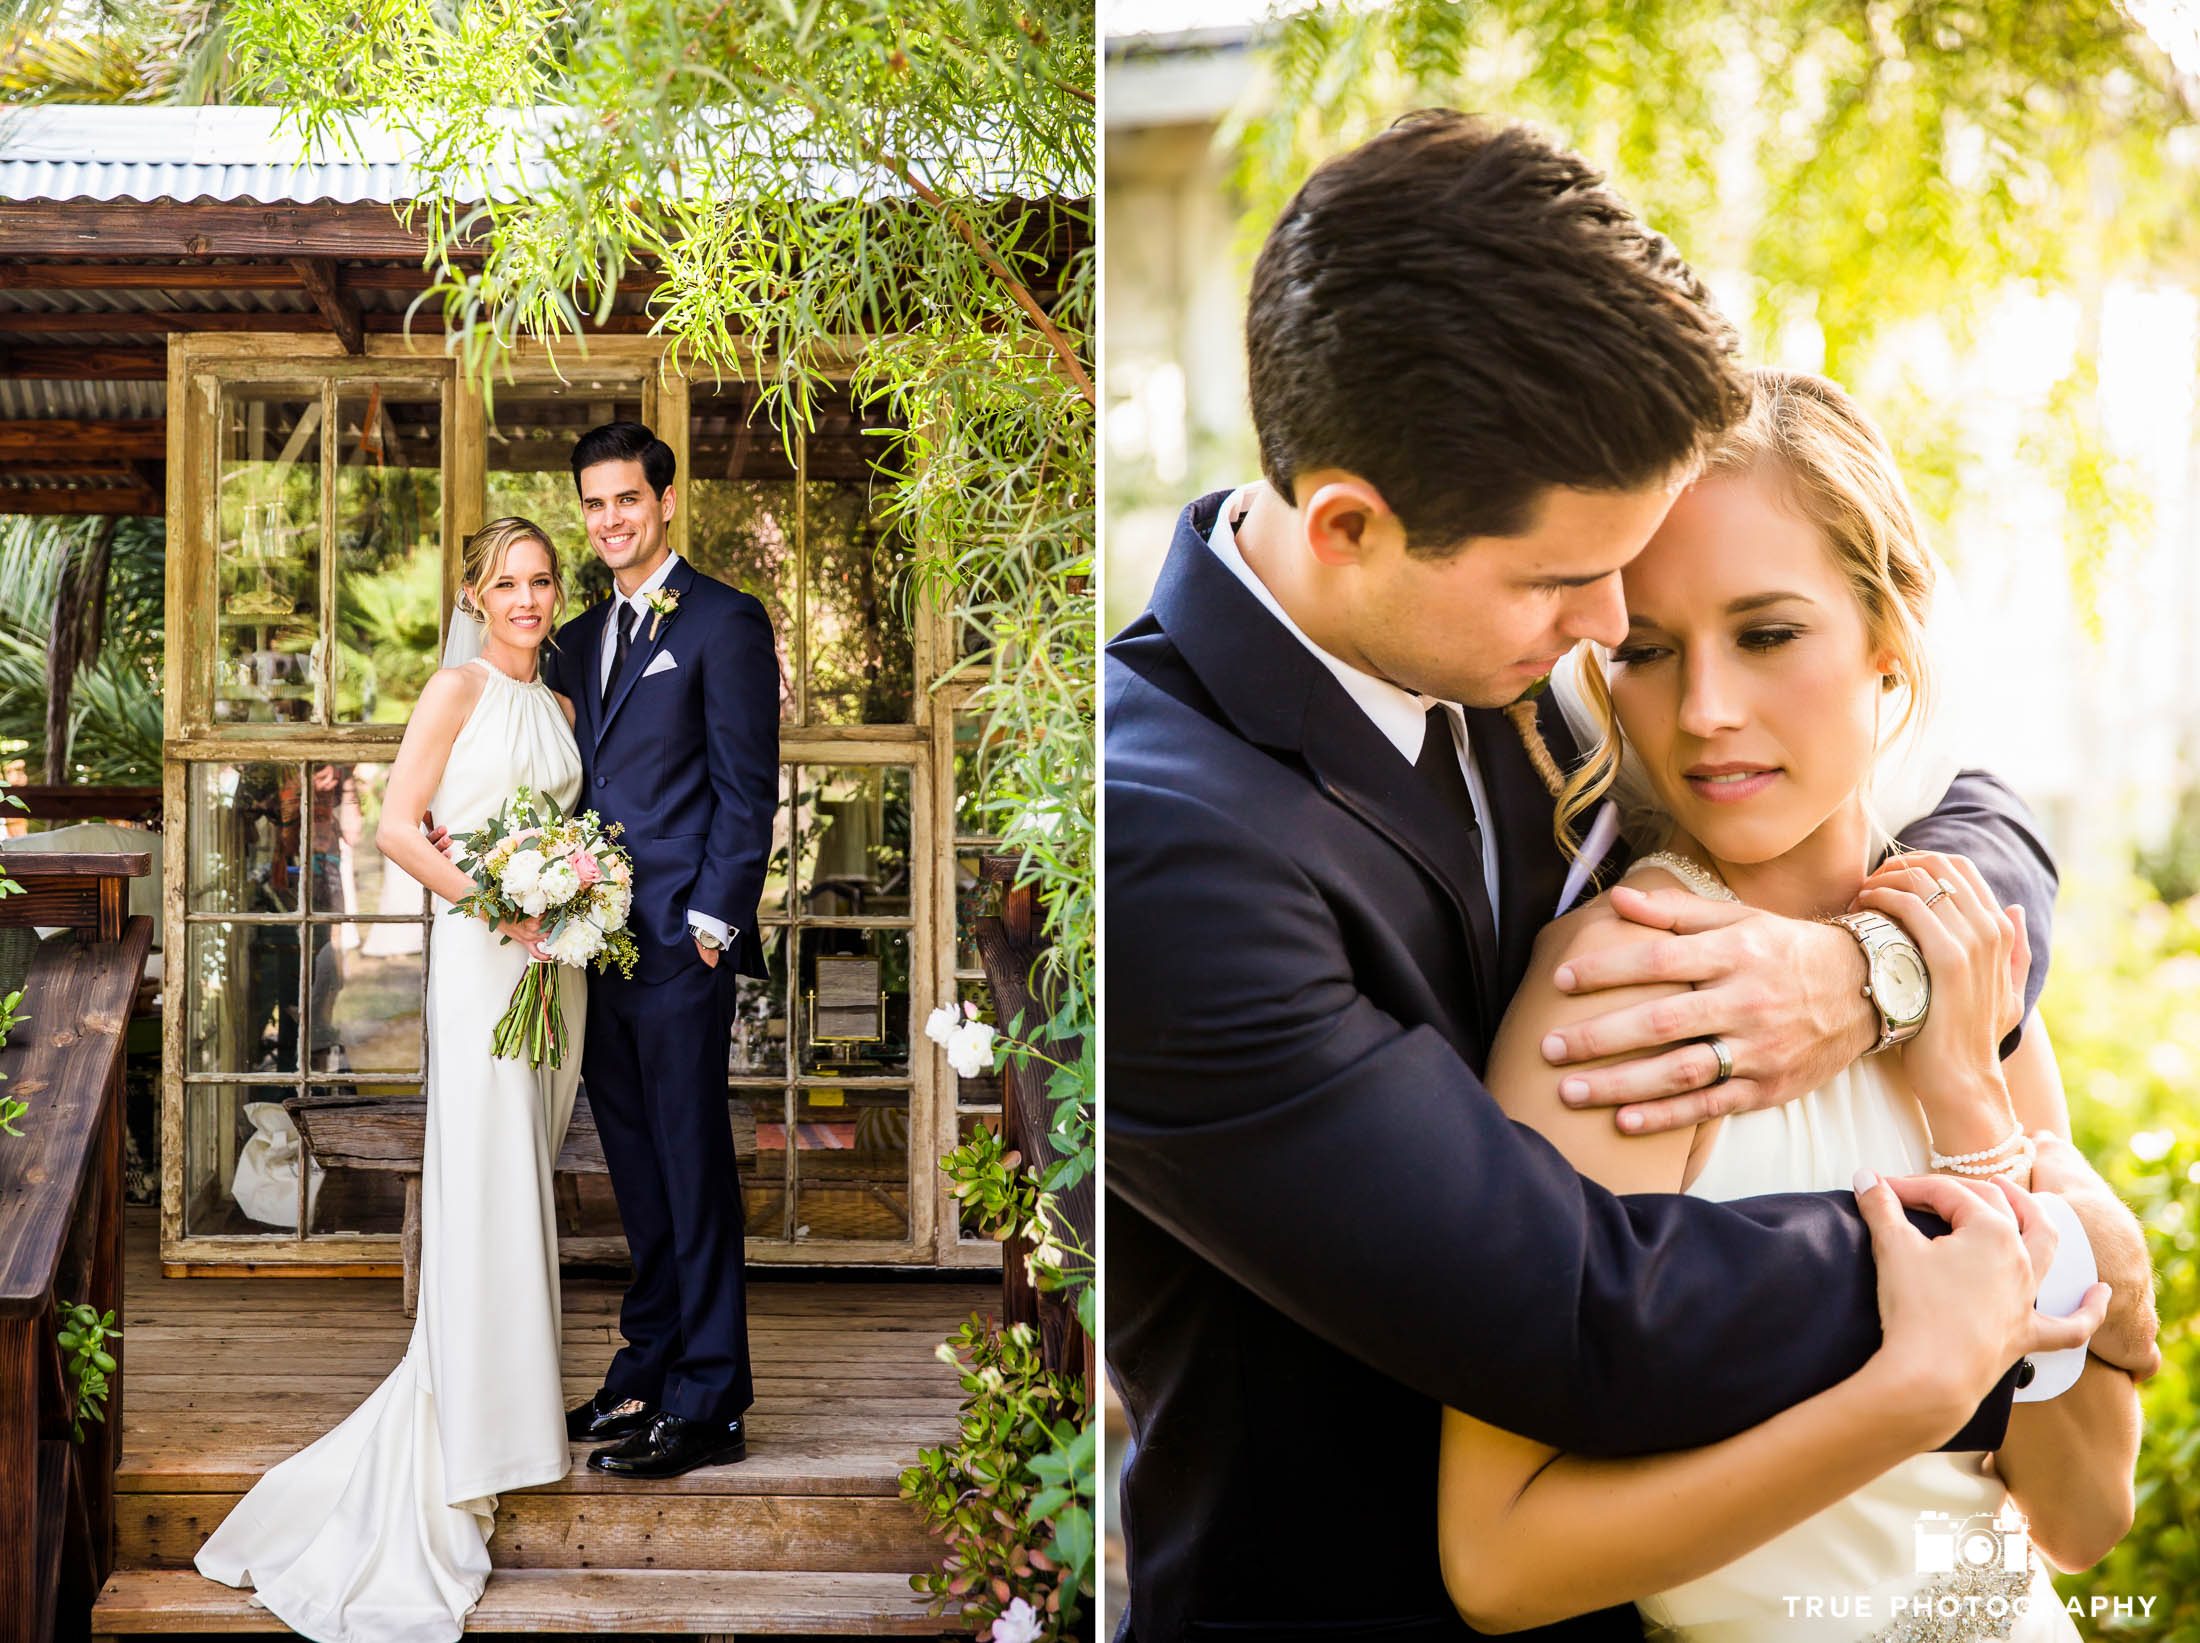 Modern bohemian wedding couple embrace one another before rustic outdoor wedding ceremony at Condor's Nest Ranch in Pala, California.